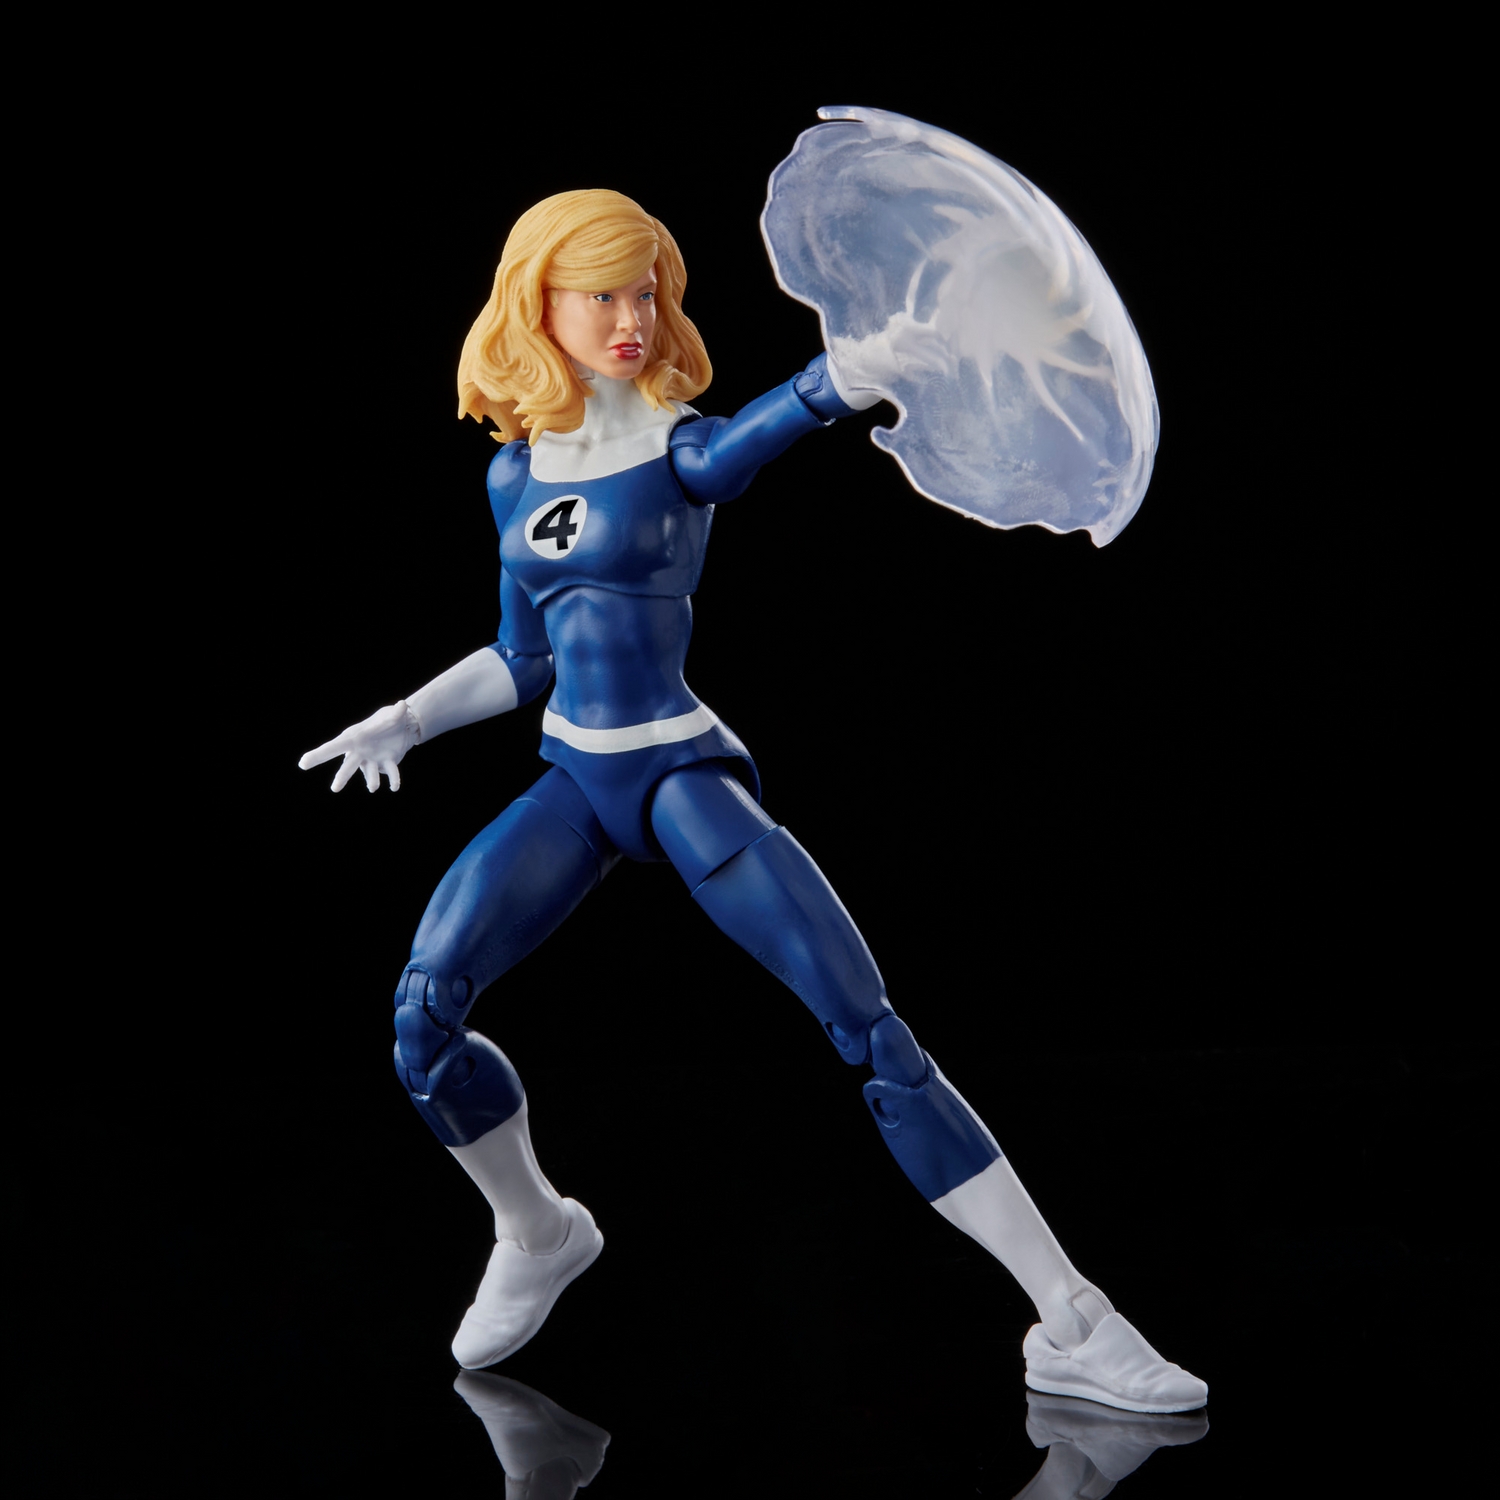 MARVEL LEGENDS SERIES 6-INCH RETRO FANTASTIC FOUR MARVEL'S INVISIBLE WOMAN Figure_oop 8.jpg